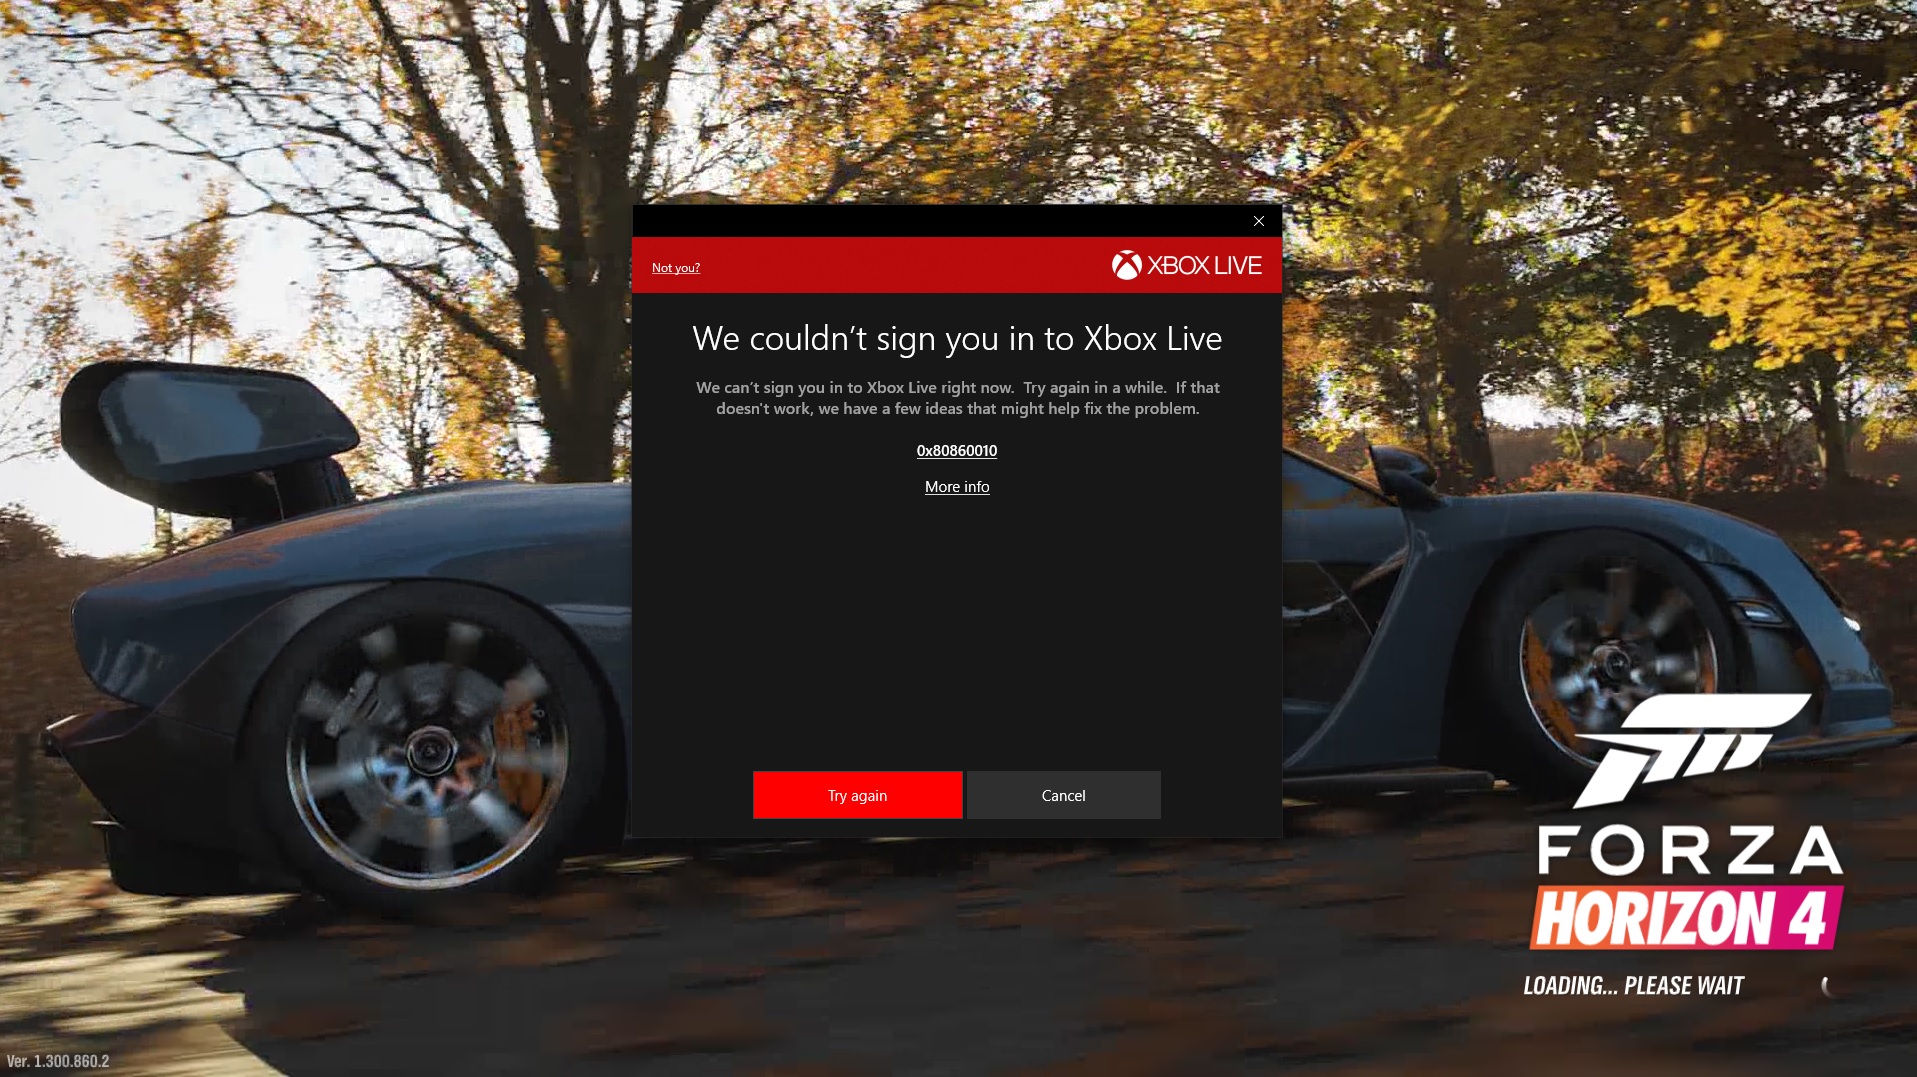 Cannot sign in Xbox Live/Forza Horizon 4